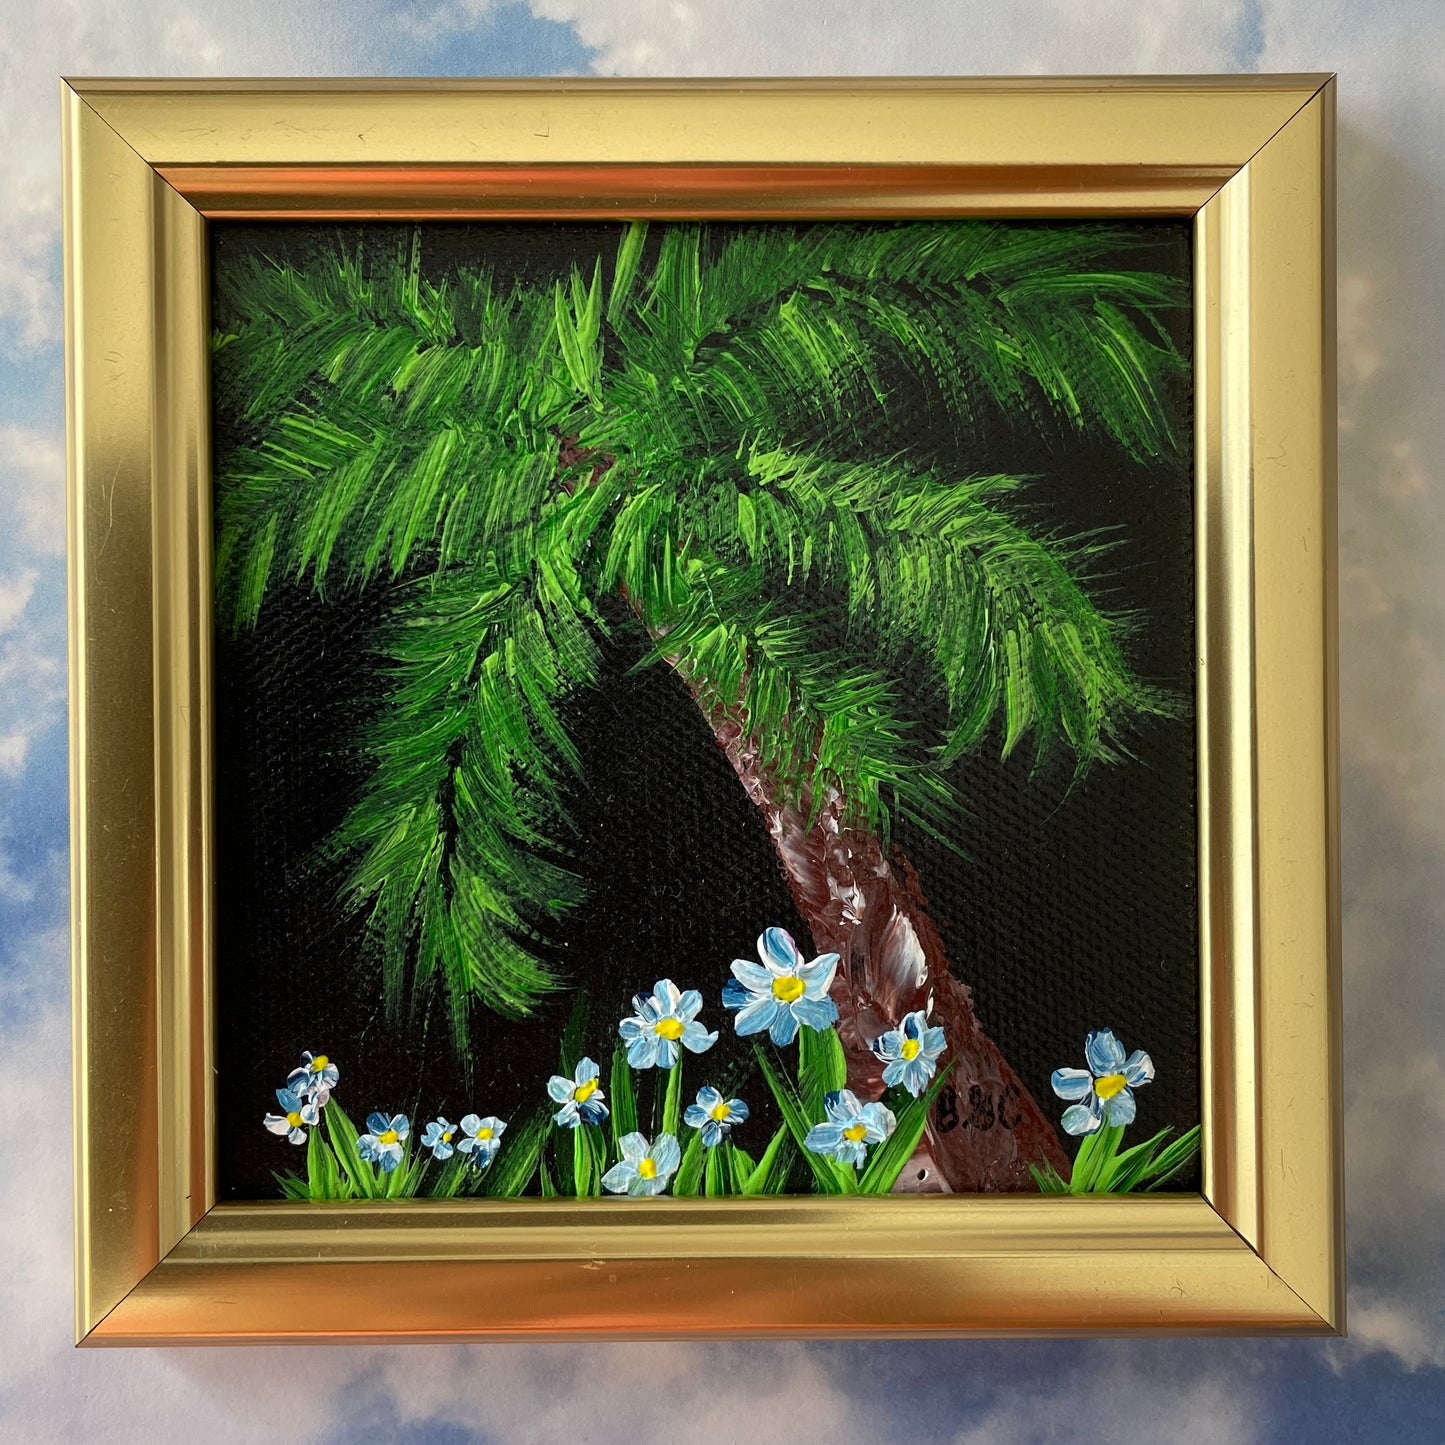 Original Painting of a Palm Tree with Blue Flowers in Hawaii